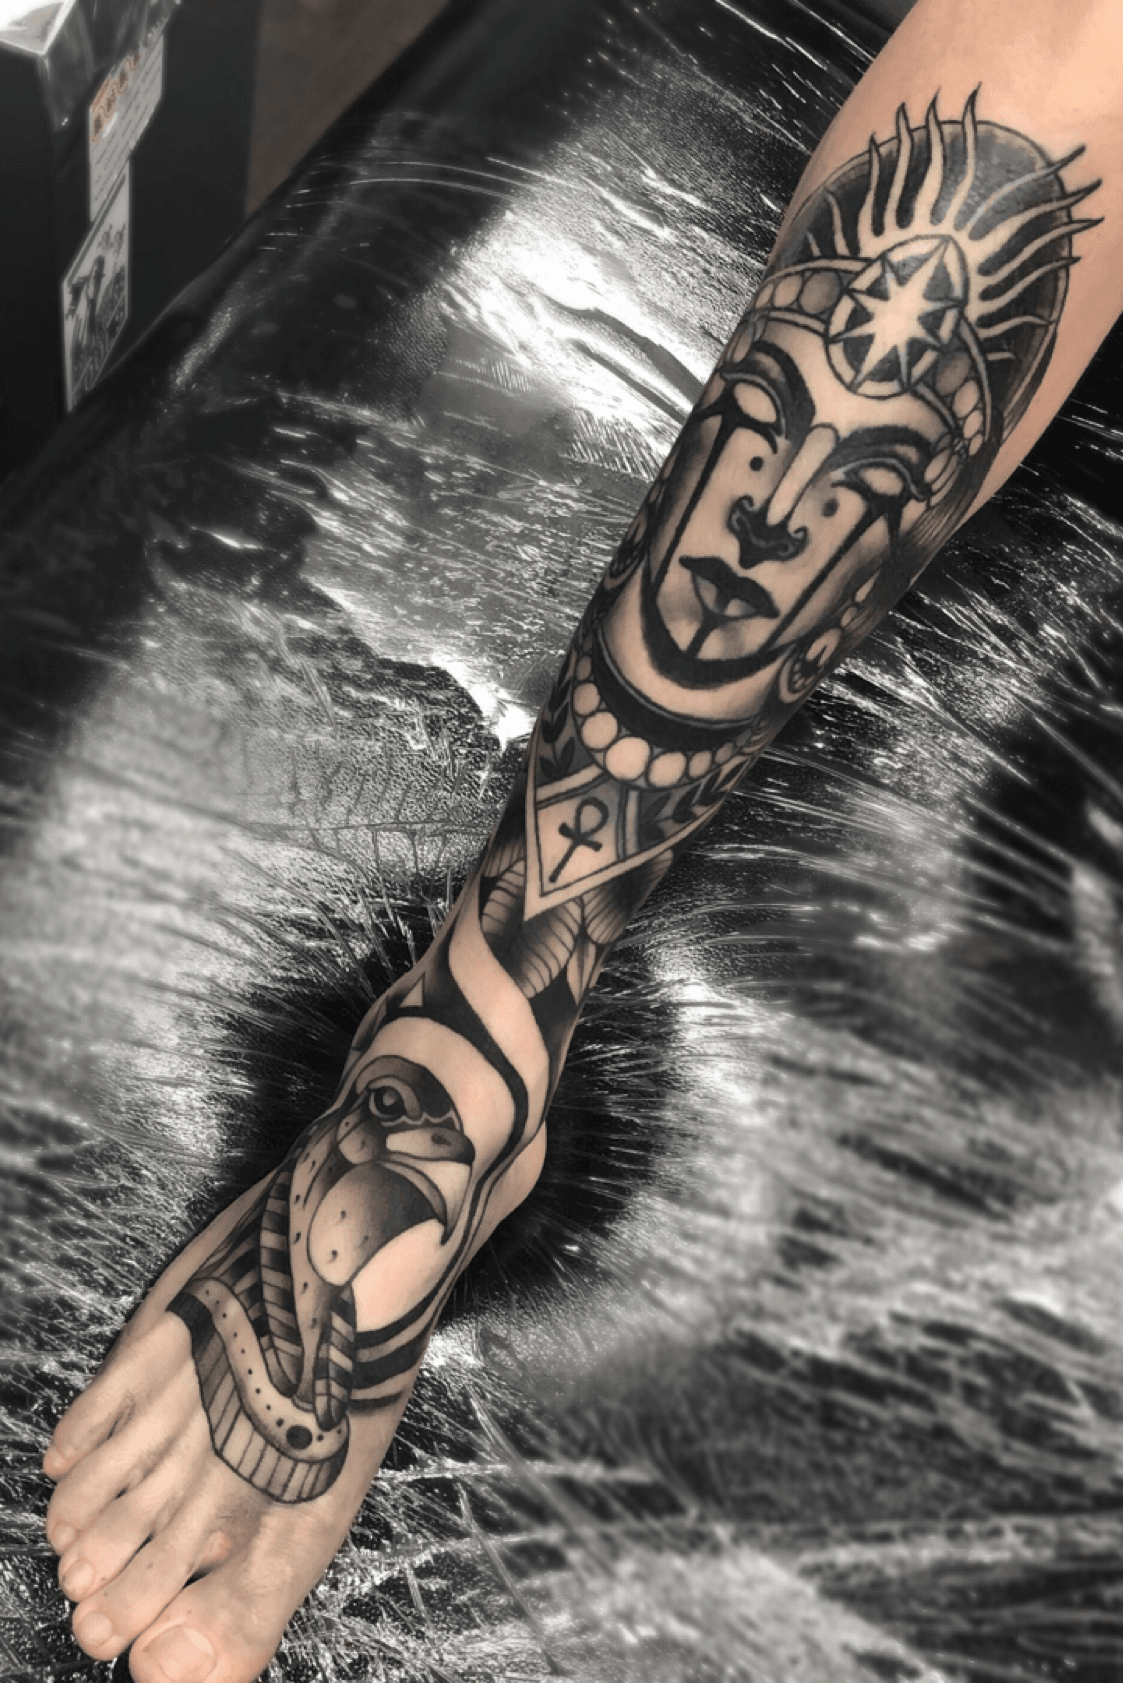 Tattoo uploaded by Dave Cook • Egyptian inspired lower leg sleeve i have  been working on #egyptian #neotraditional • Tattoodo